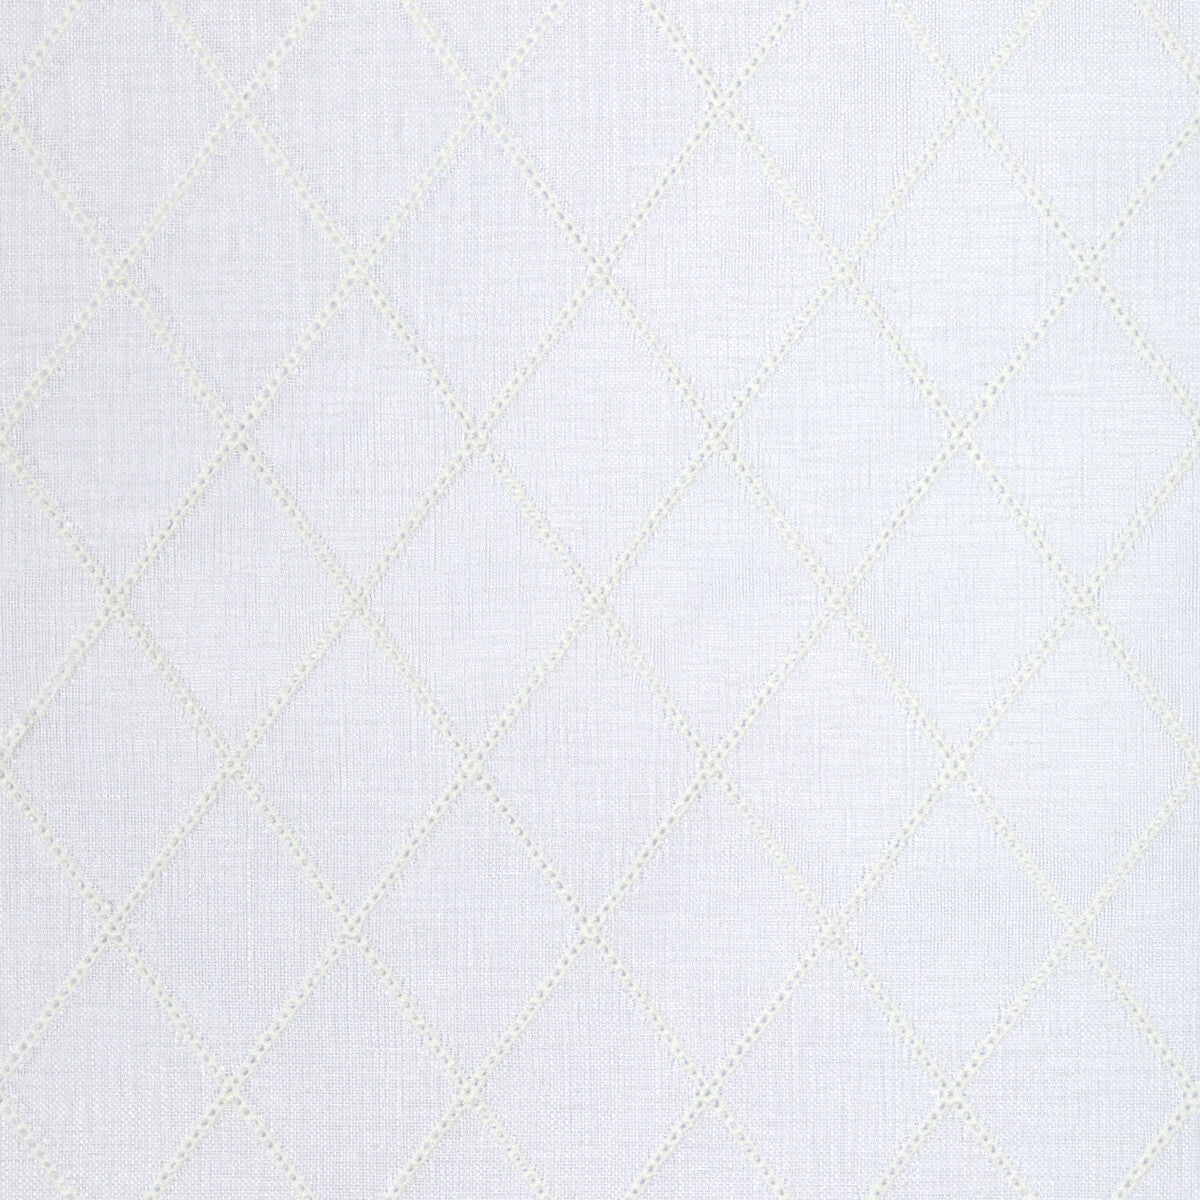 Hammonds Sheer fabric in ivory color - pattern 2021115.1116.0 - by Lee Jofa in the Summerland collection